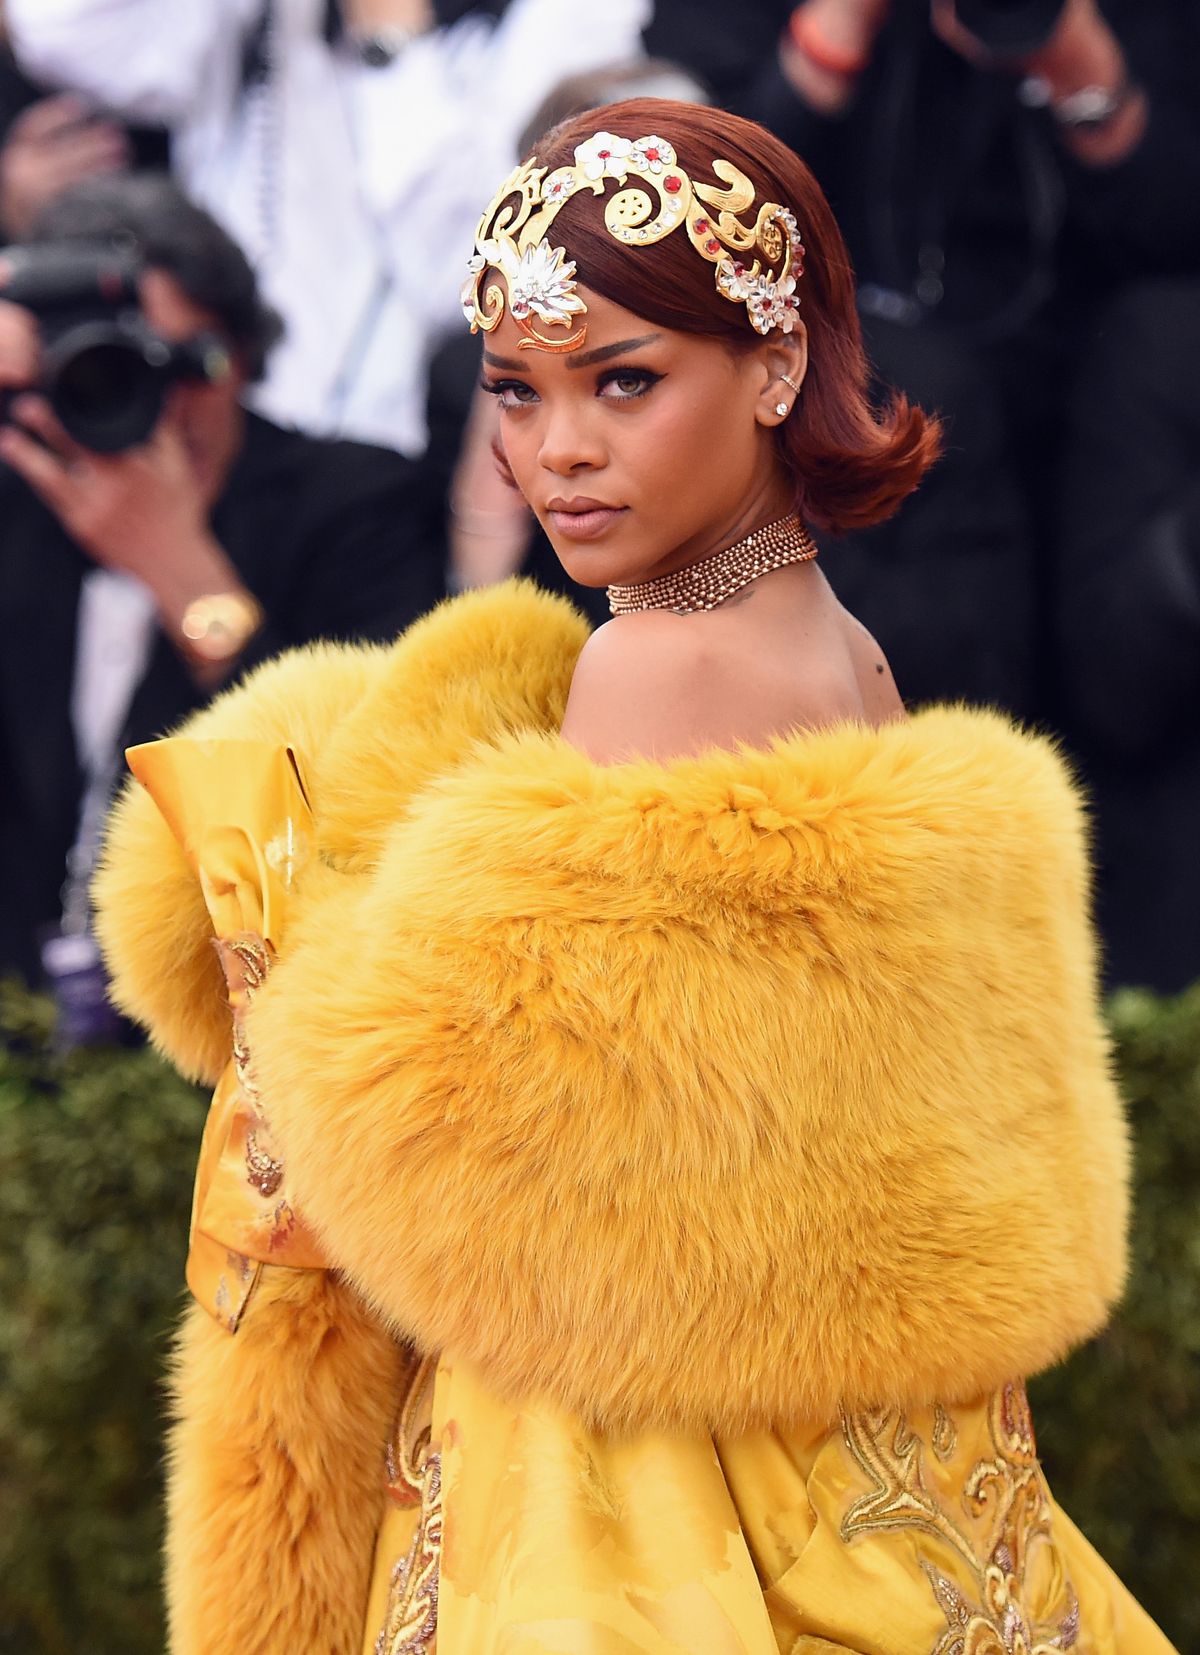 Rihanna, with an elaborate gold headdress and bright yellow fur-trimmed brocade gown, appears at the Met Gala before a crowd of onlookers.